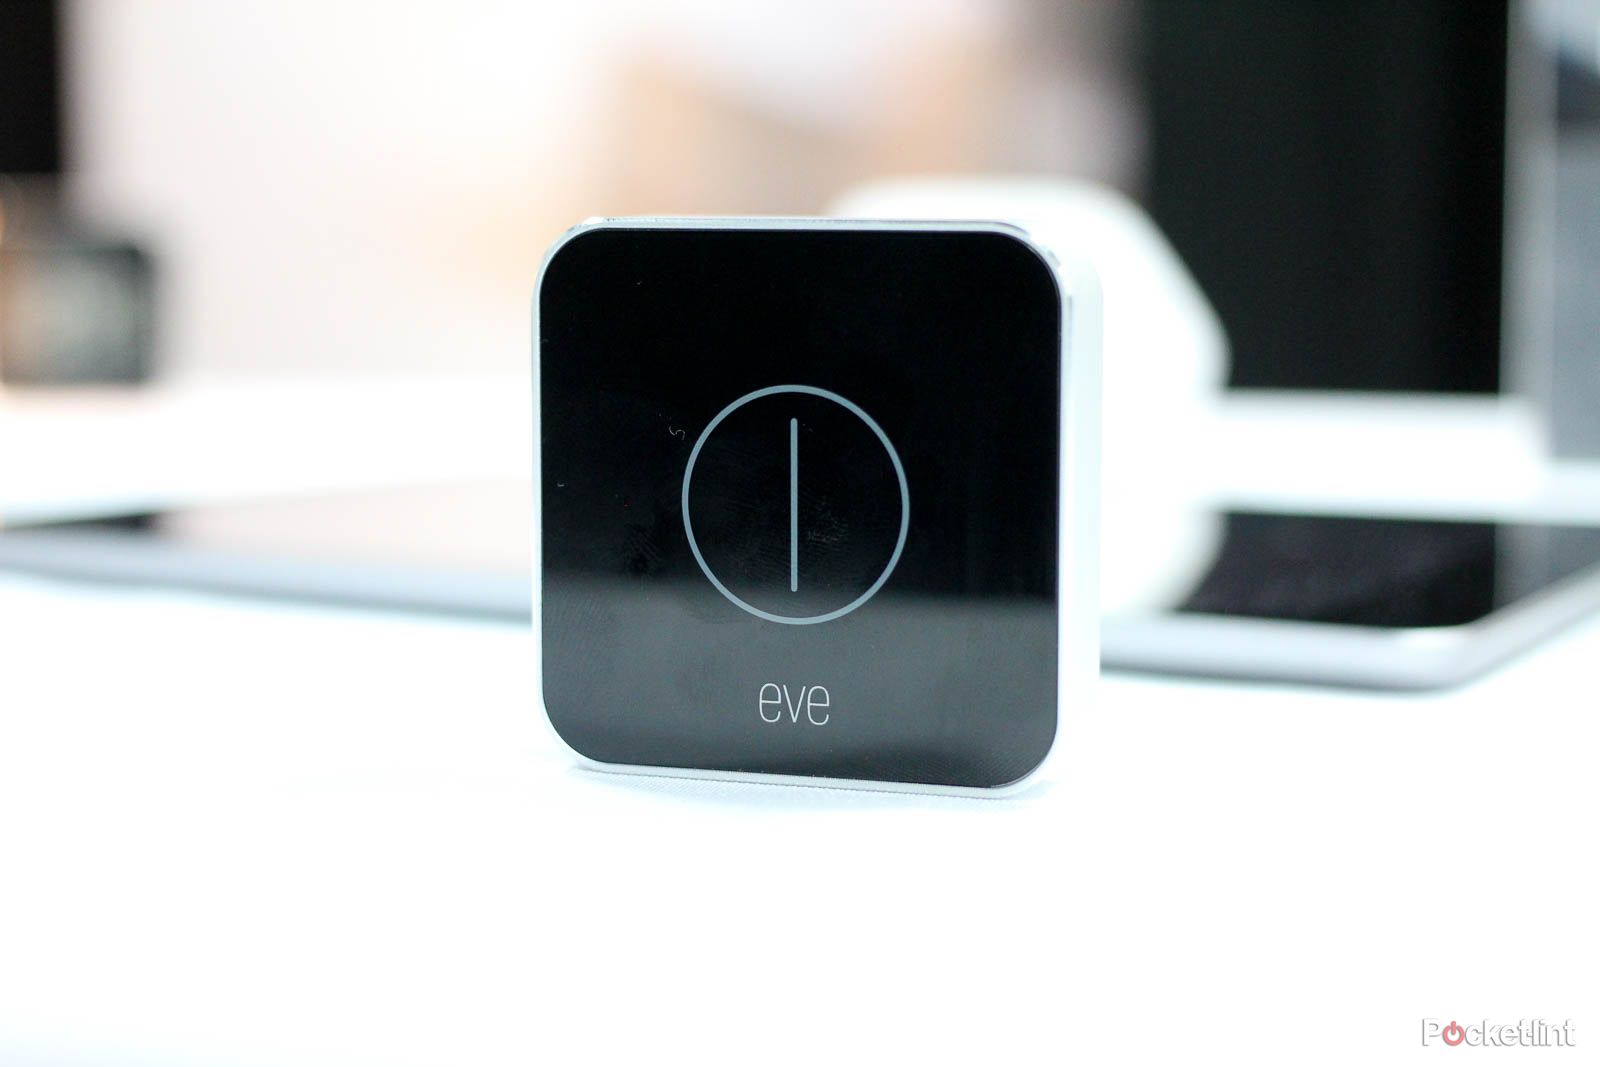 The Elgato Eve Button Is An In-room Control For Your Apple Homekit Scenes And Devices image 1